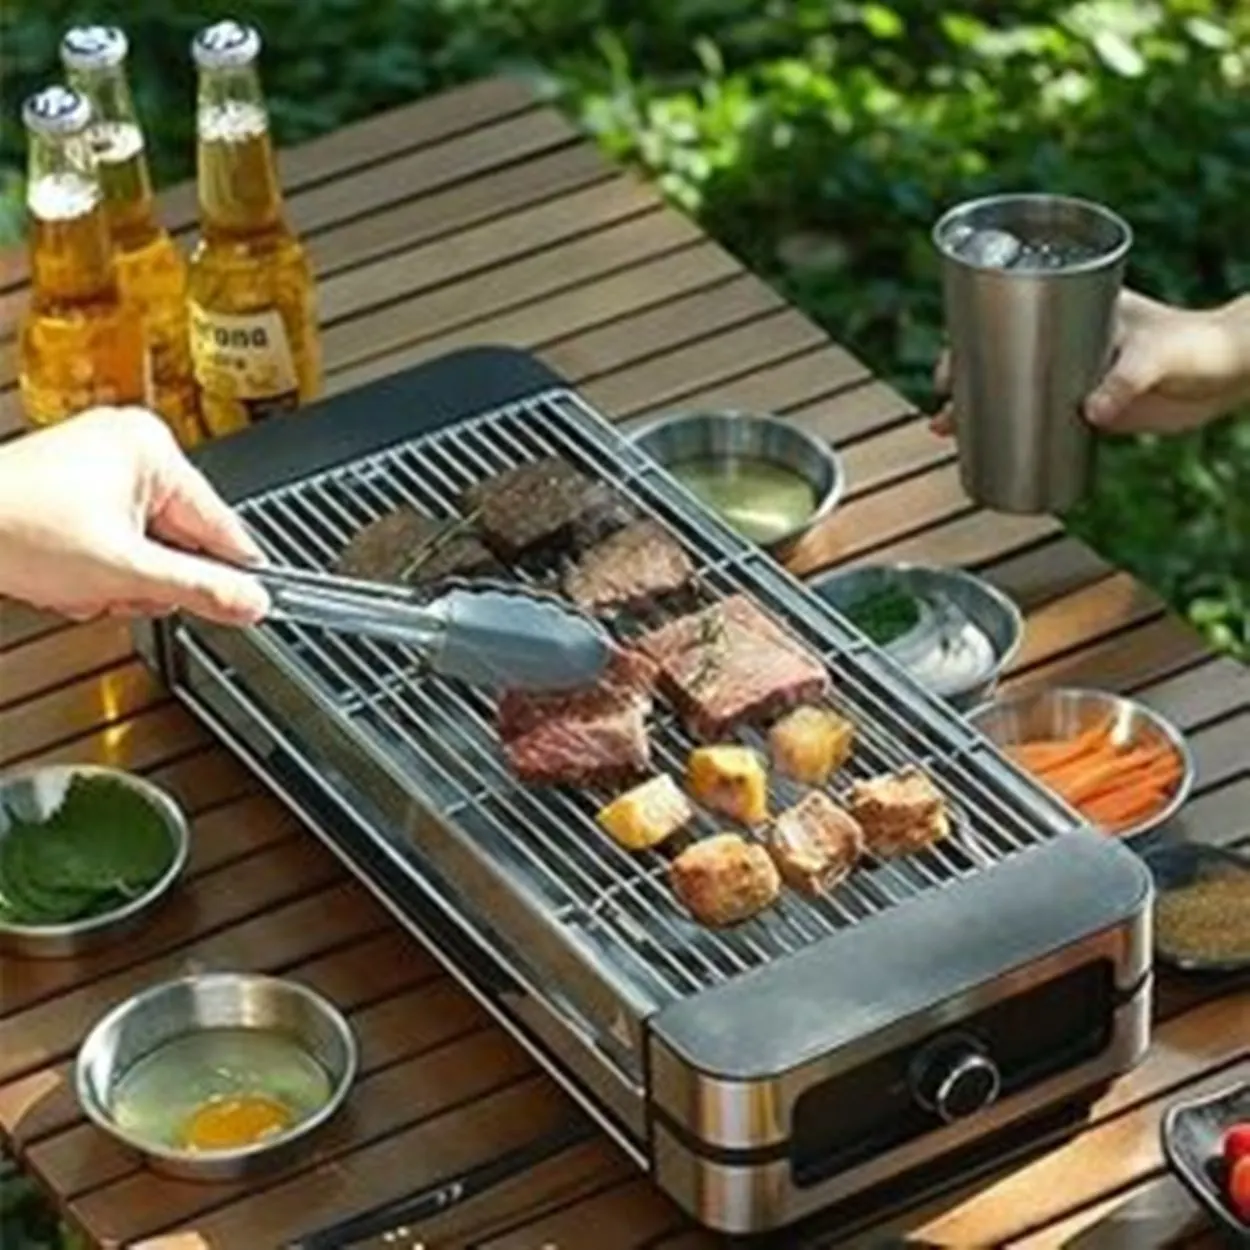 High-power electric grill being used to cook food